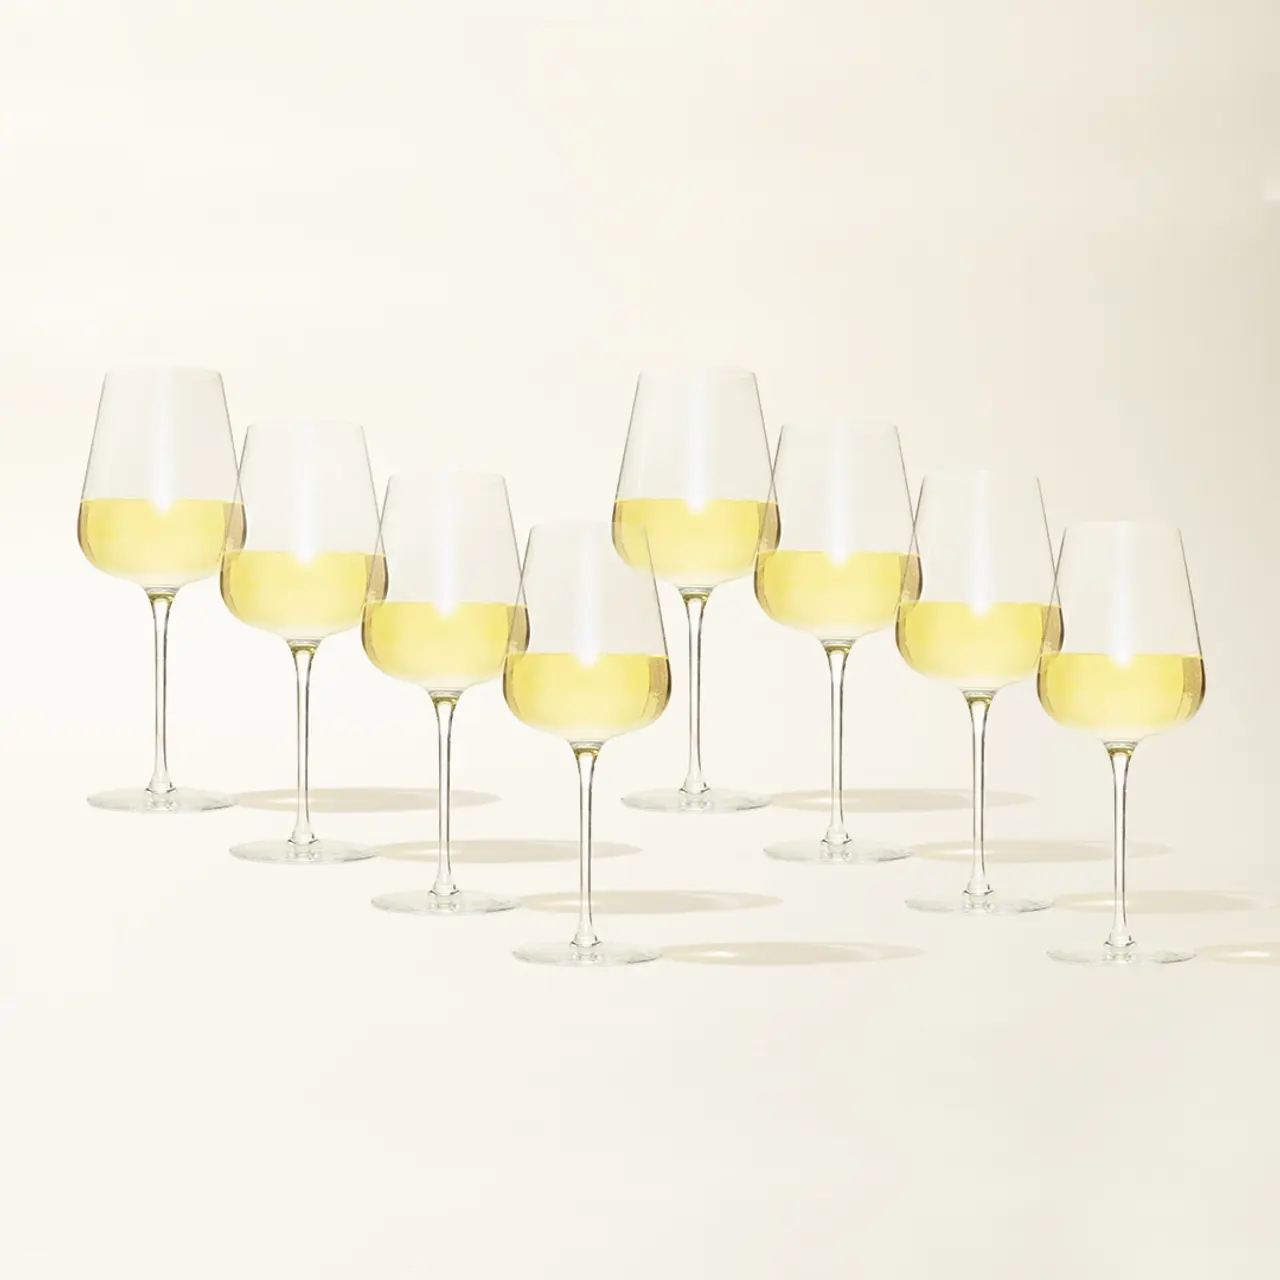 Several wine glasses filled with white wine are arranged in a row on a light background.